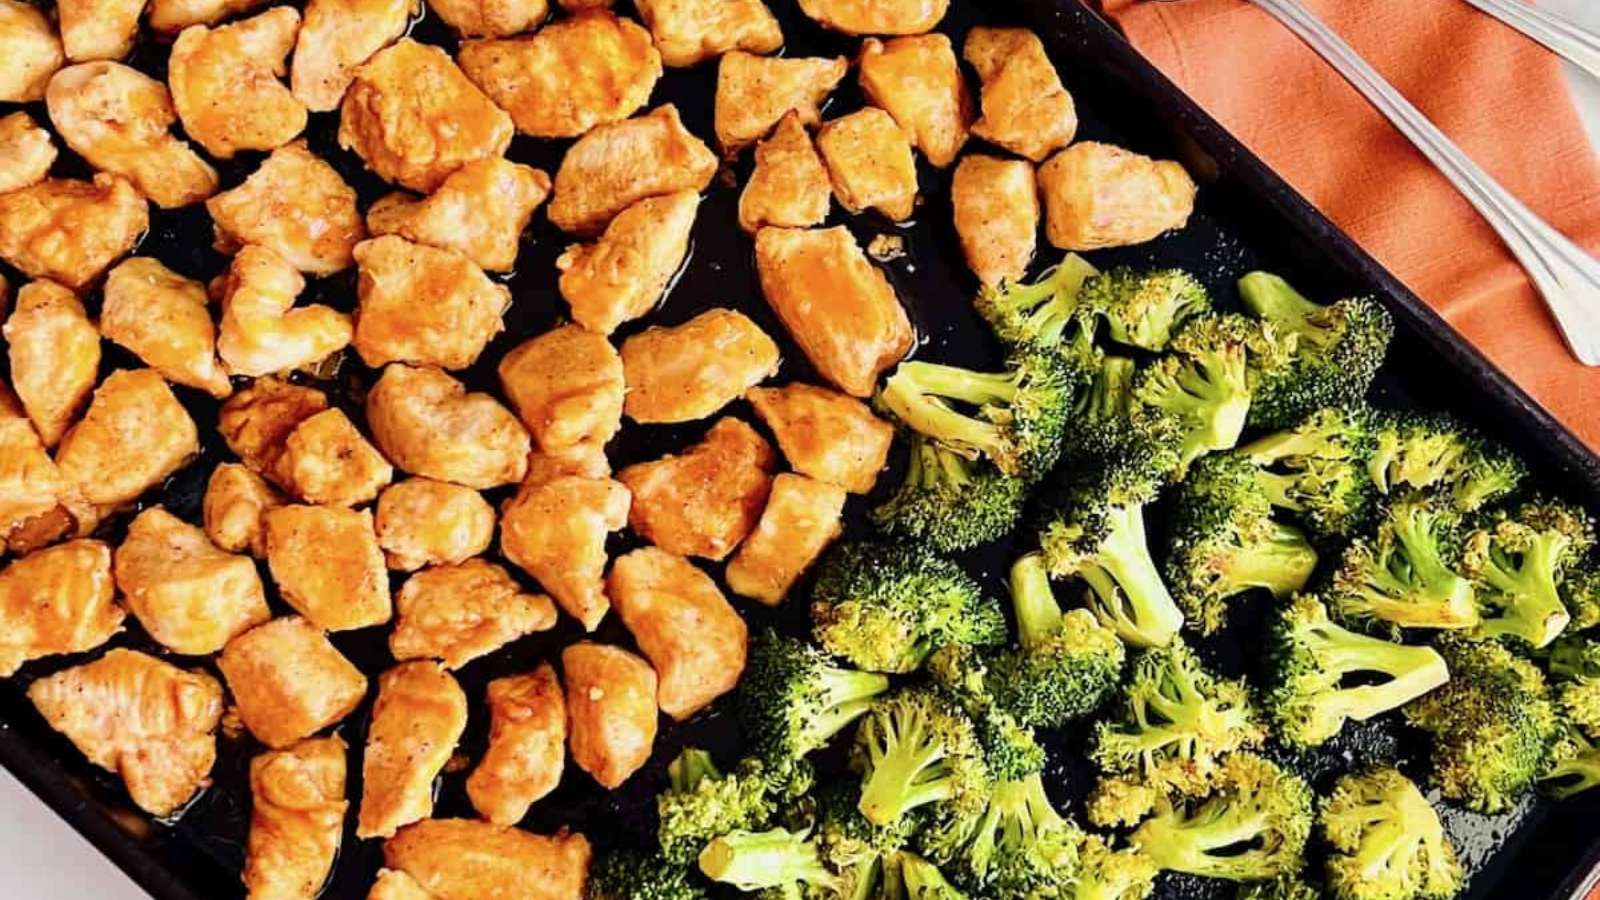 Chicken and broccoli on a baking sheet.